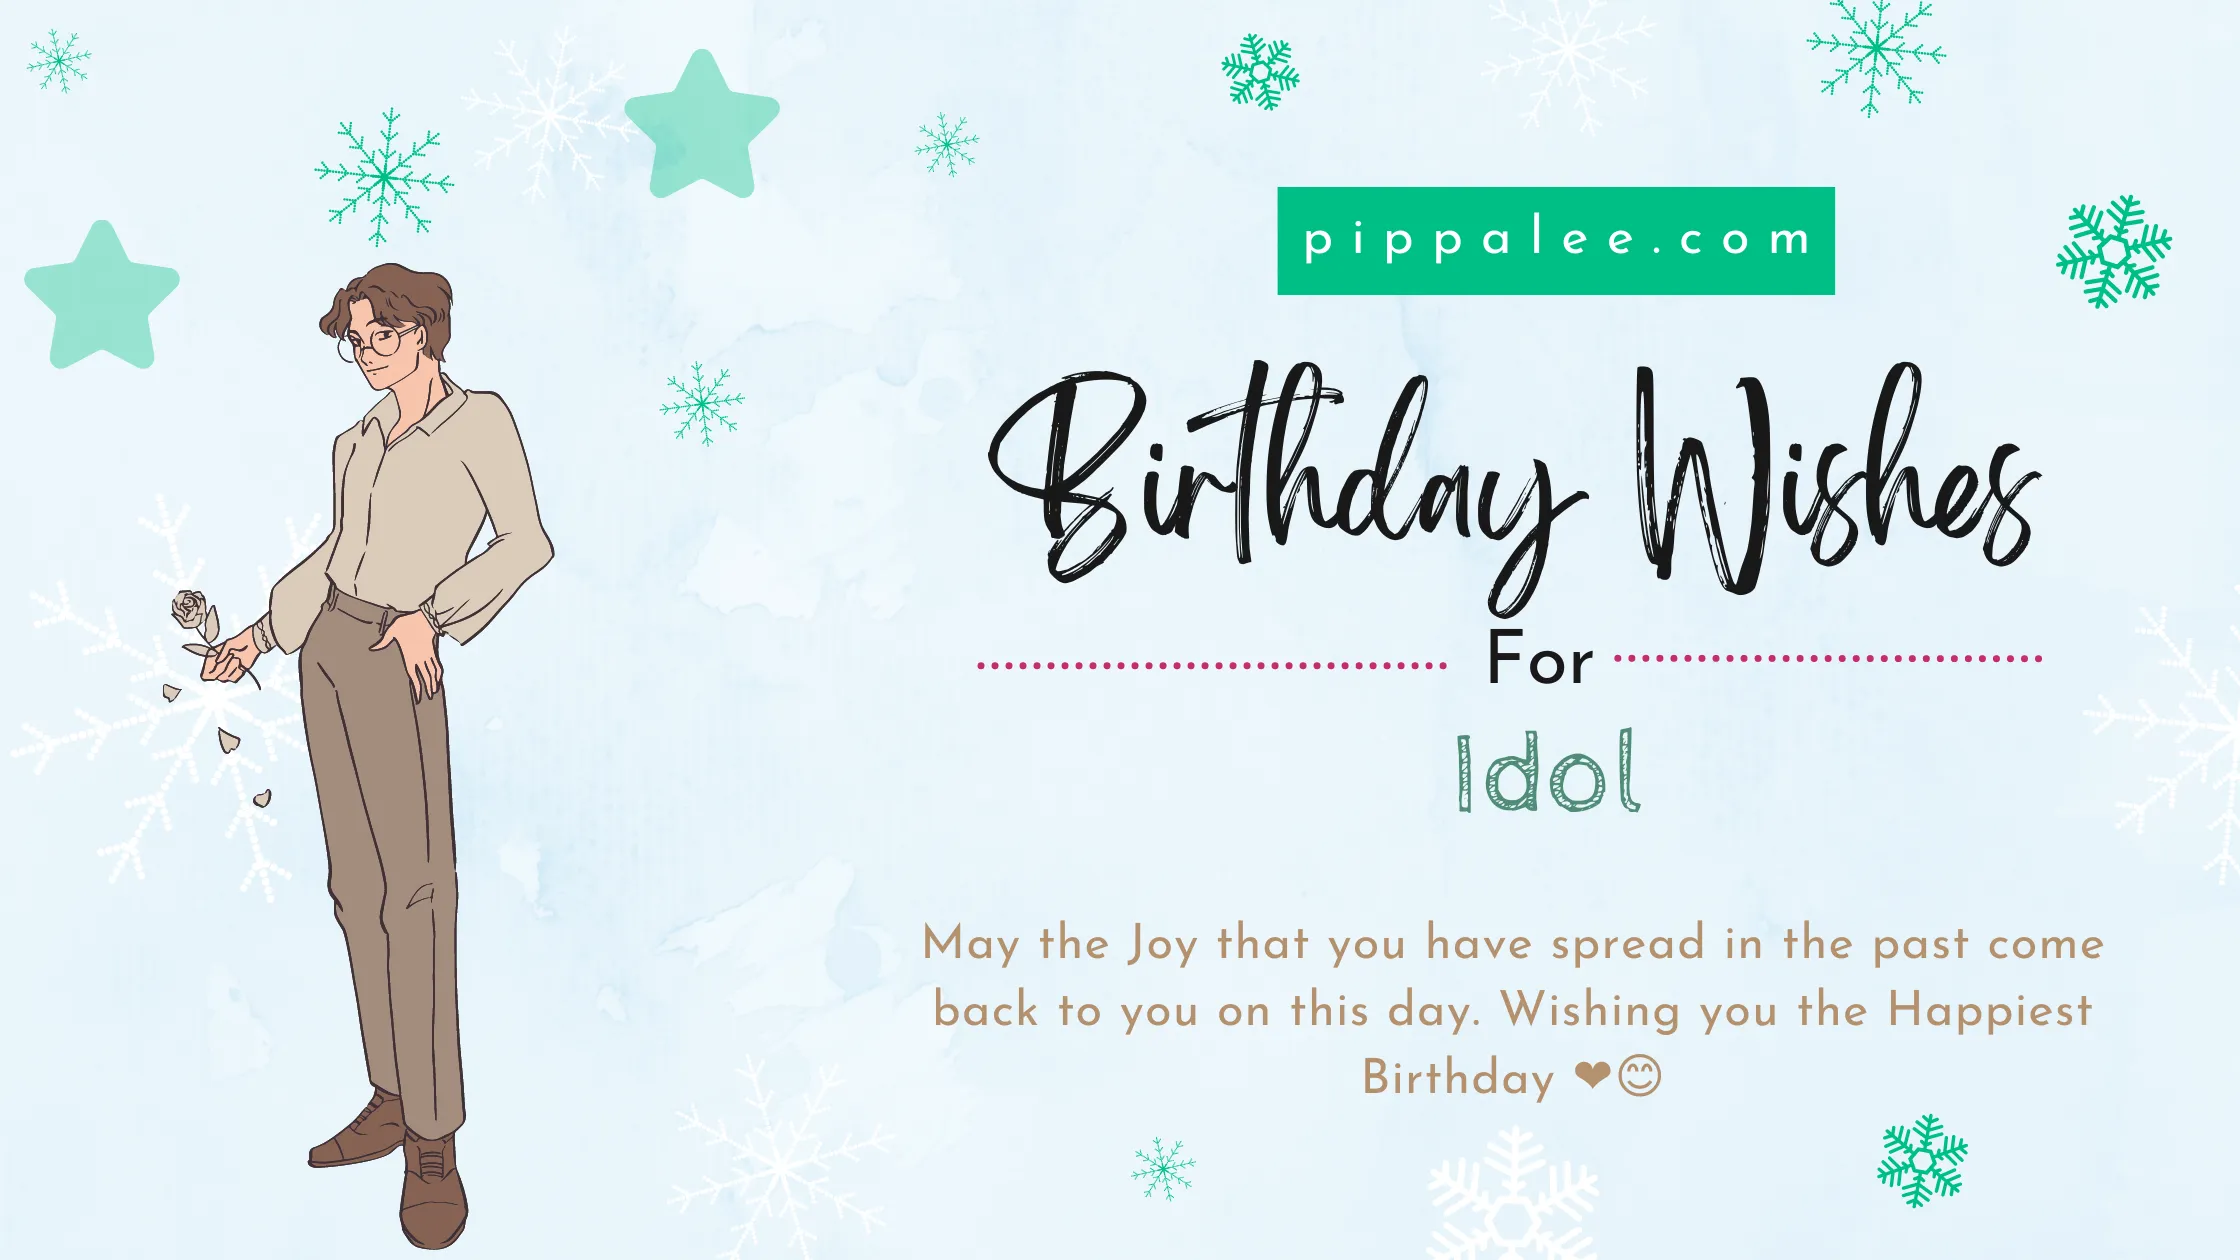 Birthday Wishes For Idol - Wishes & Messages